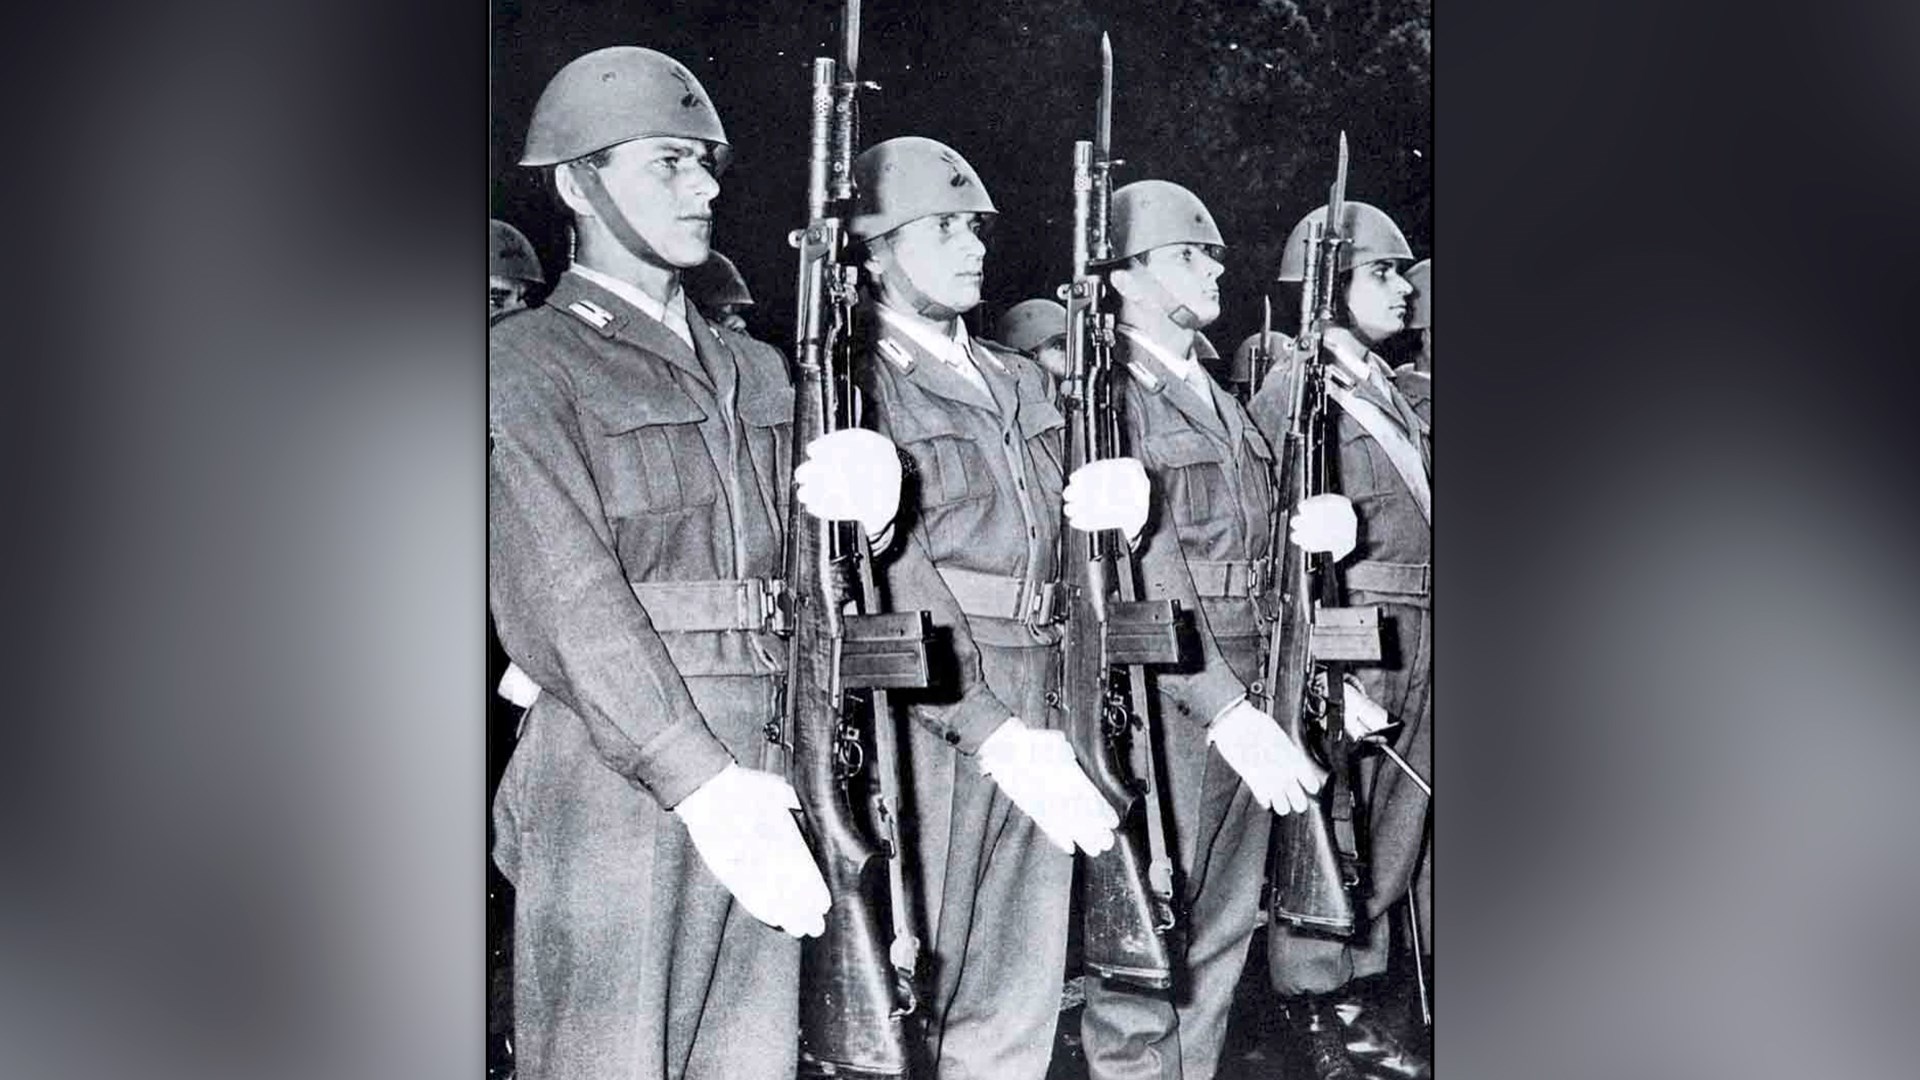 An Italian honor guard armed with BM-59 Ital select-fire rifles in Rome in 1966.